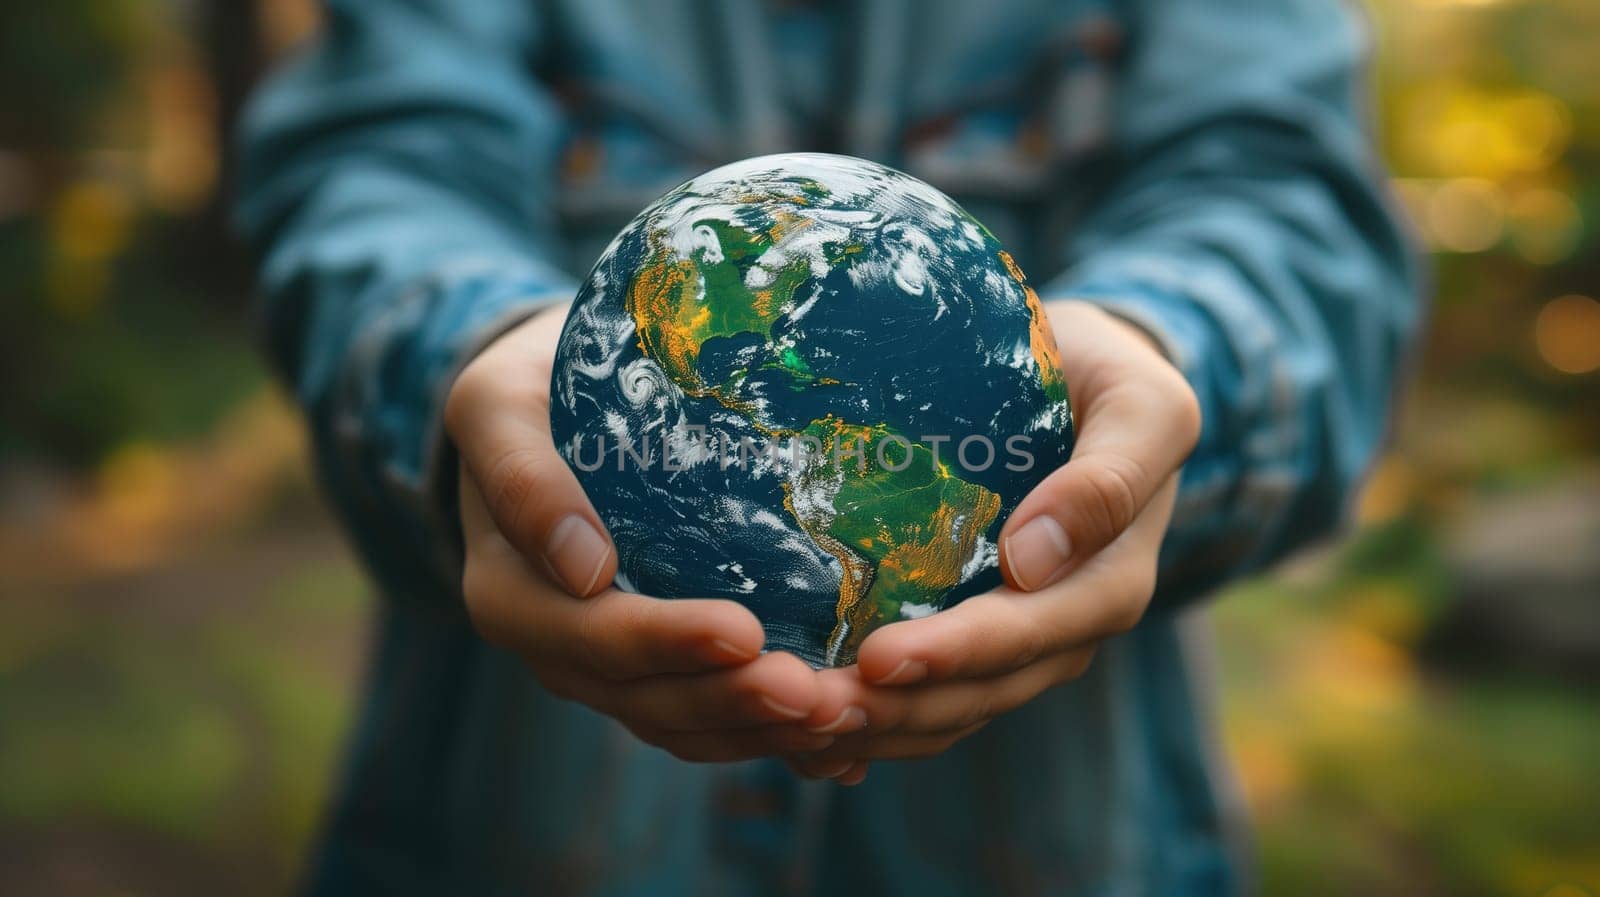 A person holding a small globe in their hands, symbolizing Earth Day concept. The hands gently cradle the globe, showcasing care for the planet and environmental awareness.